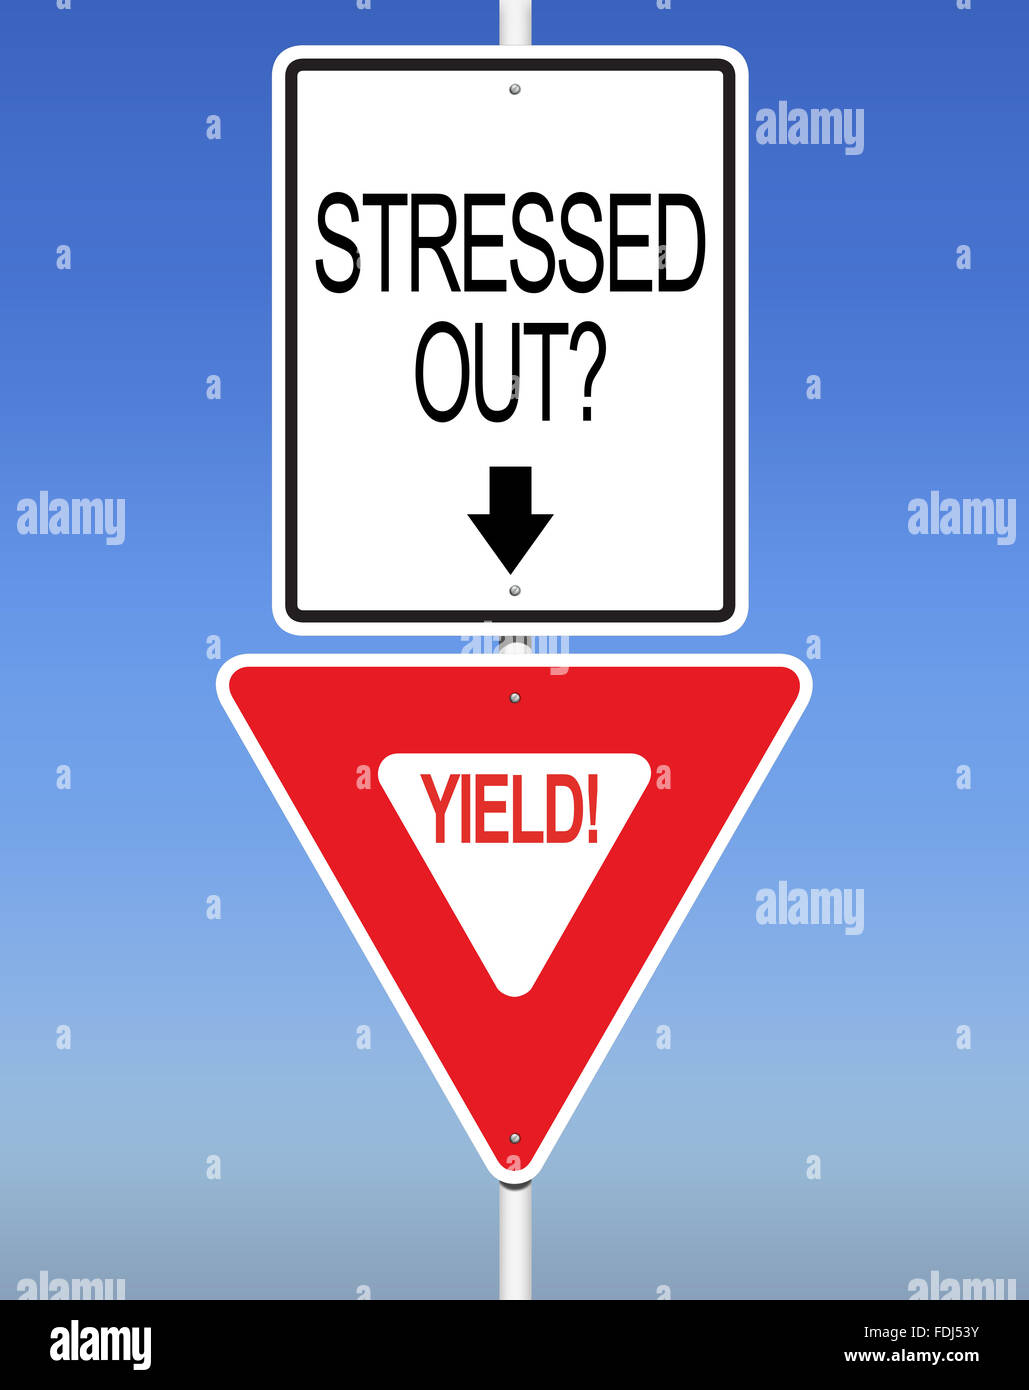 Stressed? Yield! Road Sign Stock Photo